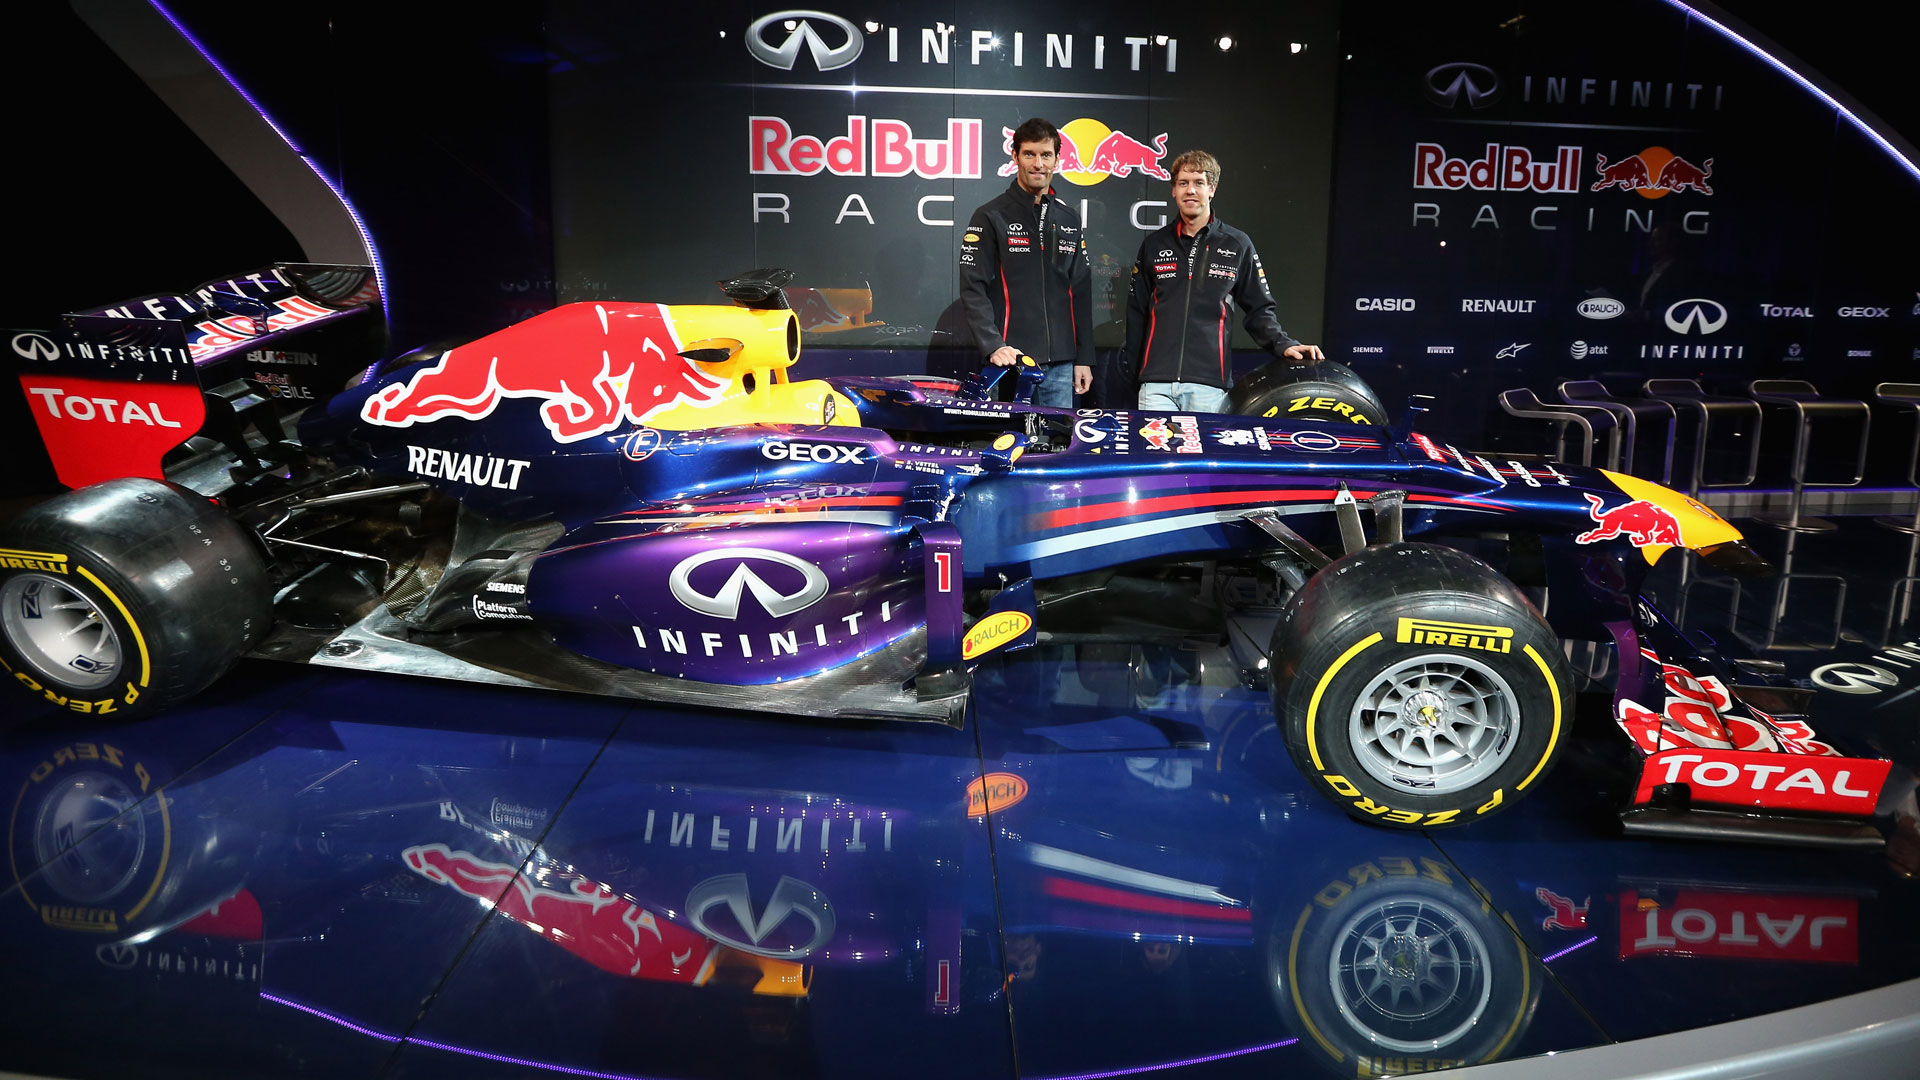 HD Pictures Launch Red Bull Rb9 F1 Car Fansite